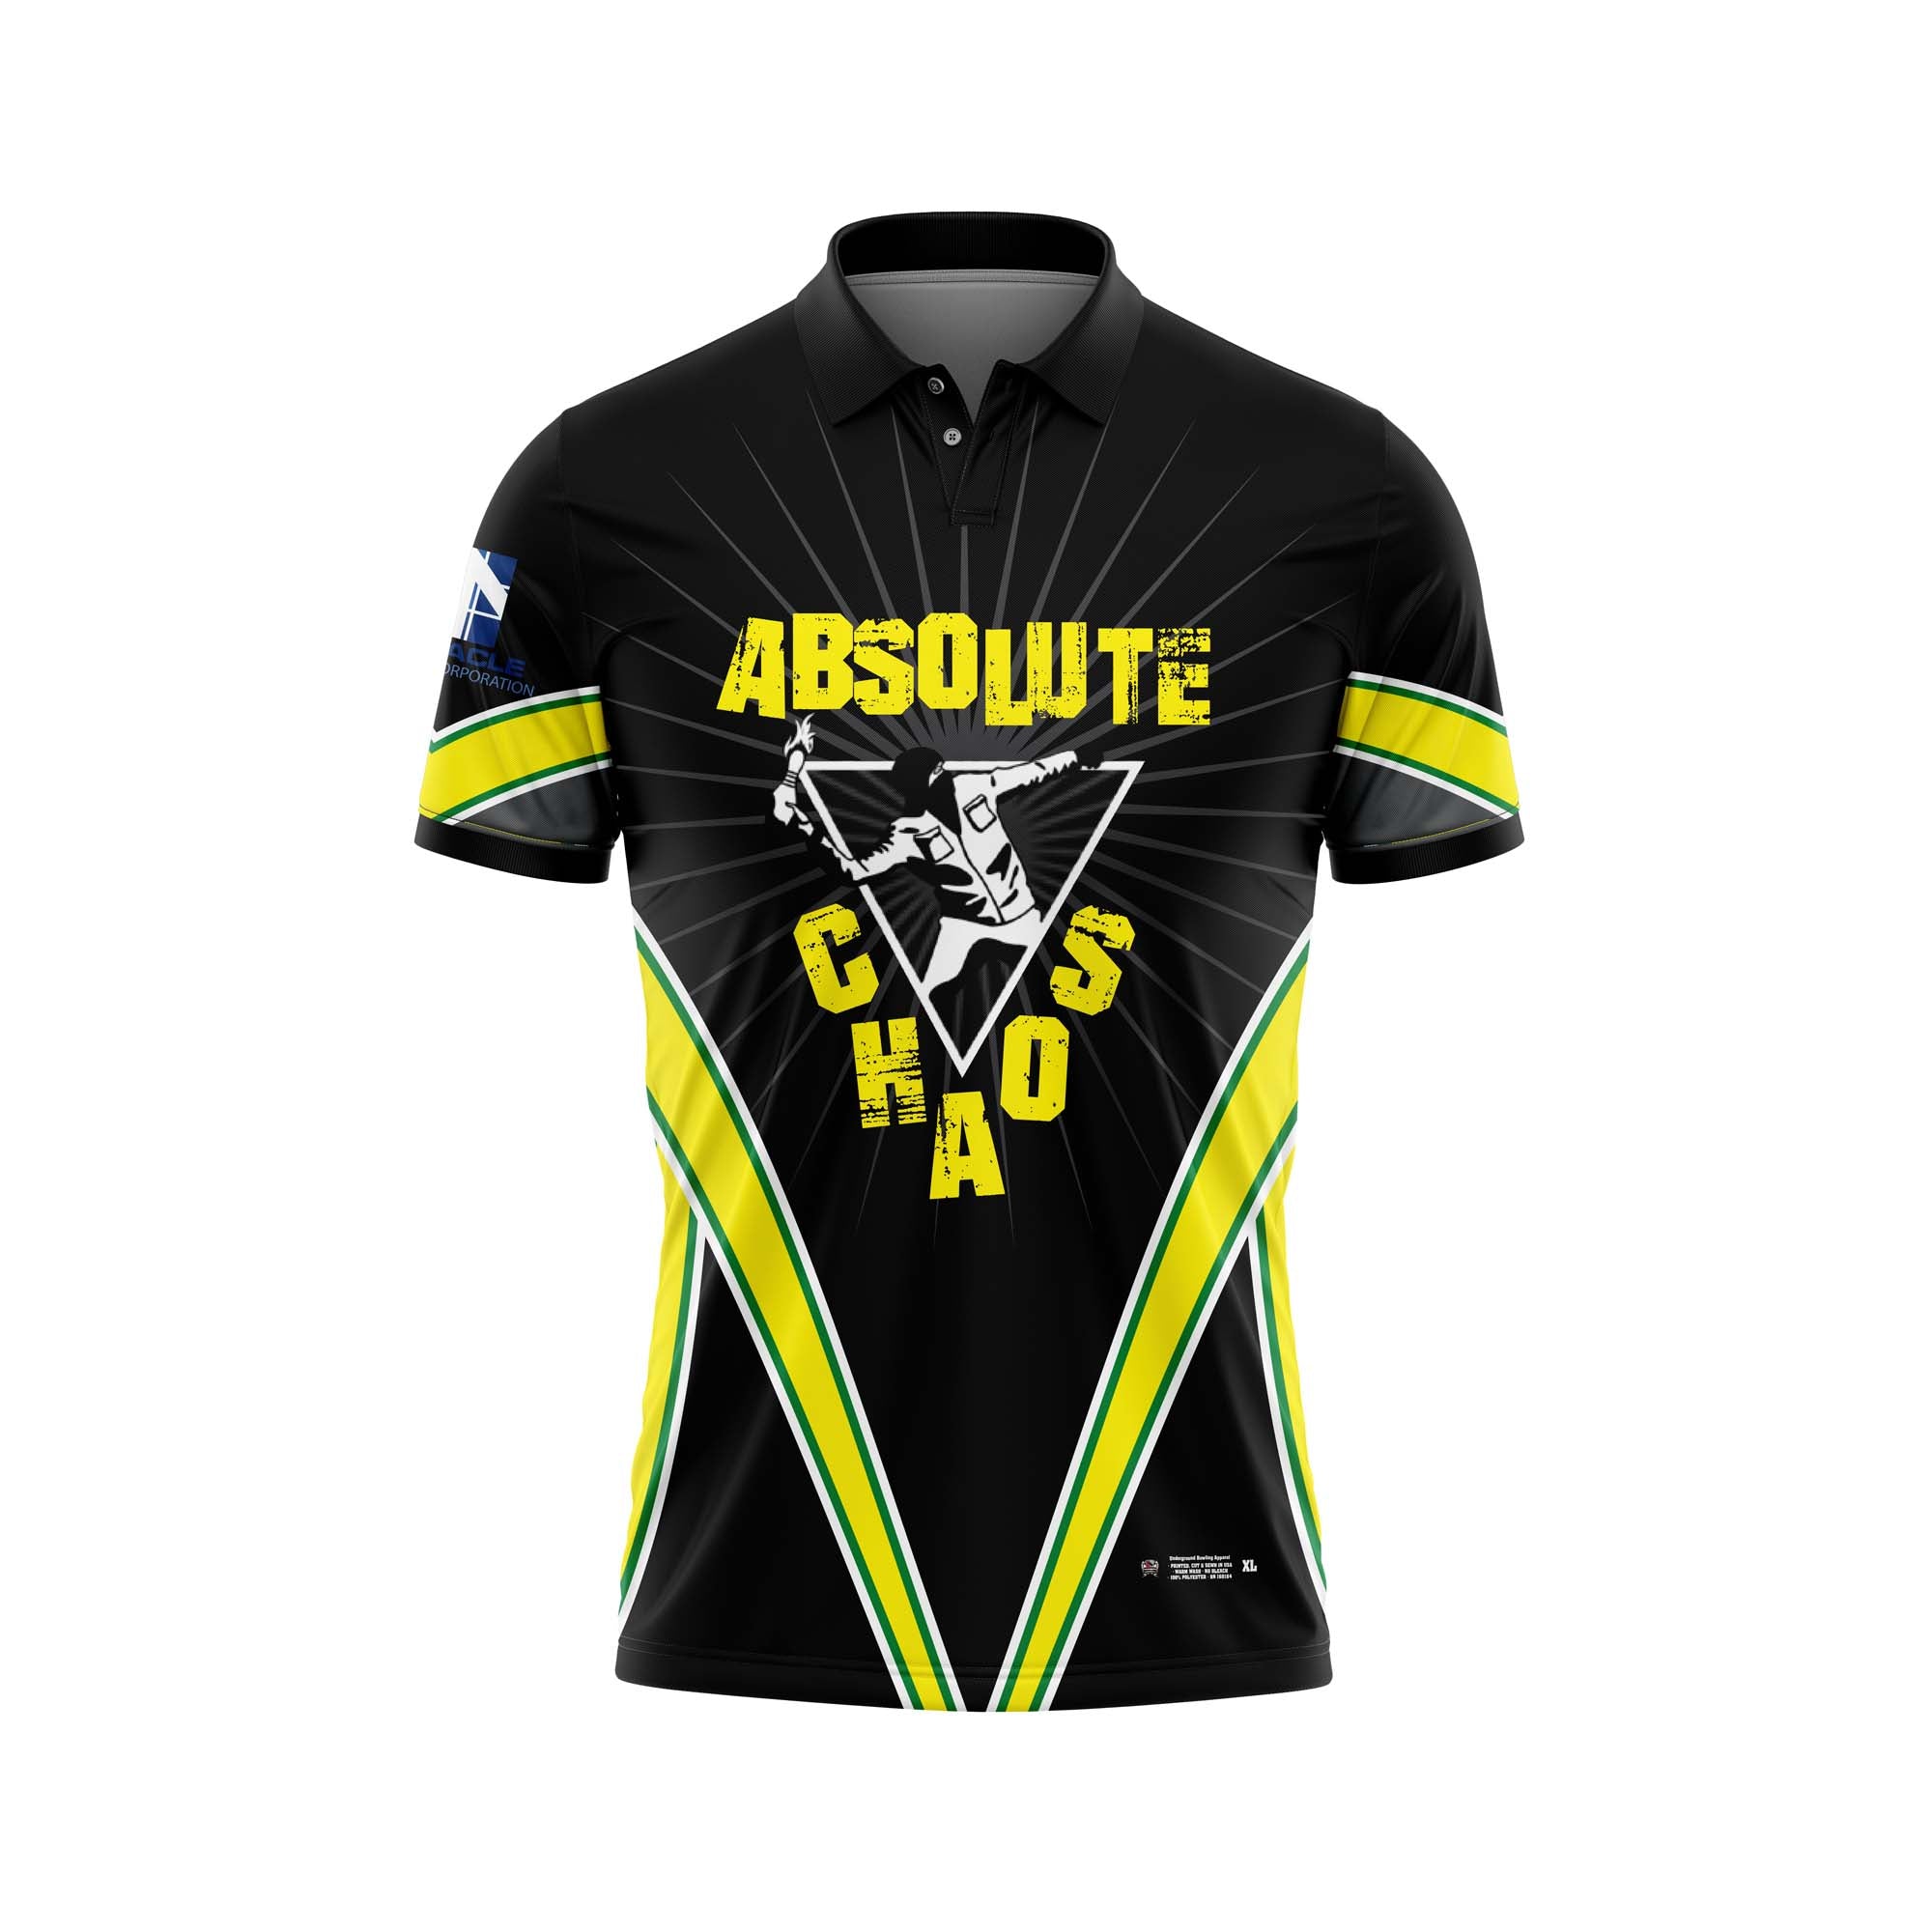 Absolute Chaos Home Jerseys